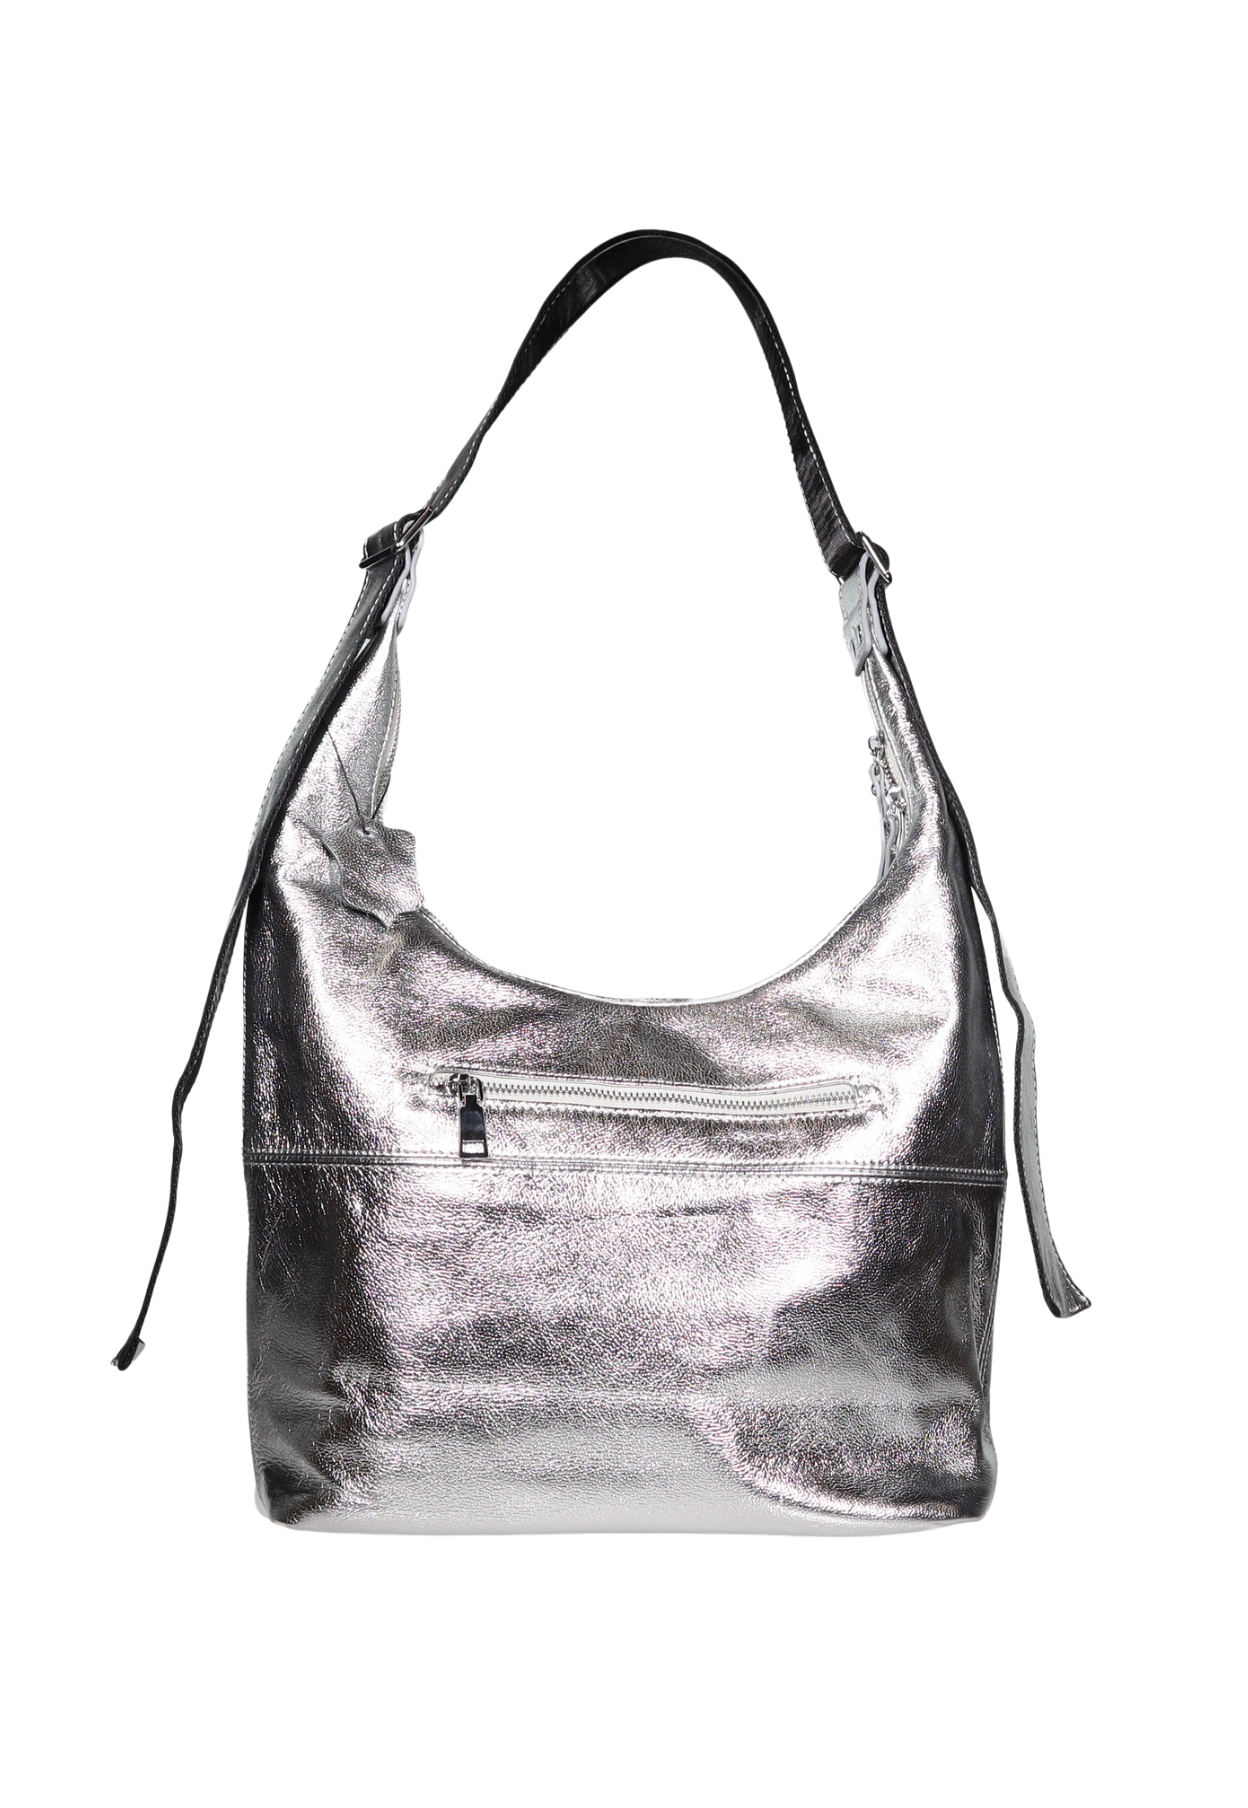 MINX SLOUCH BAG - SILVER - THE VOGUE STORE